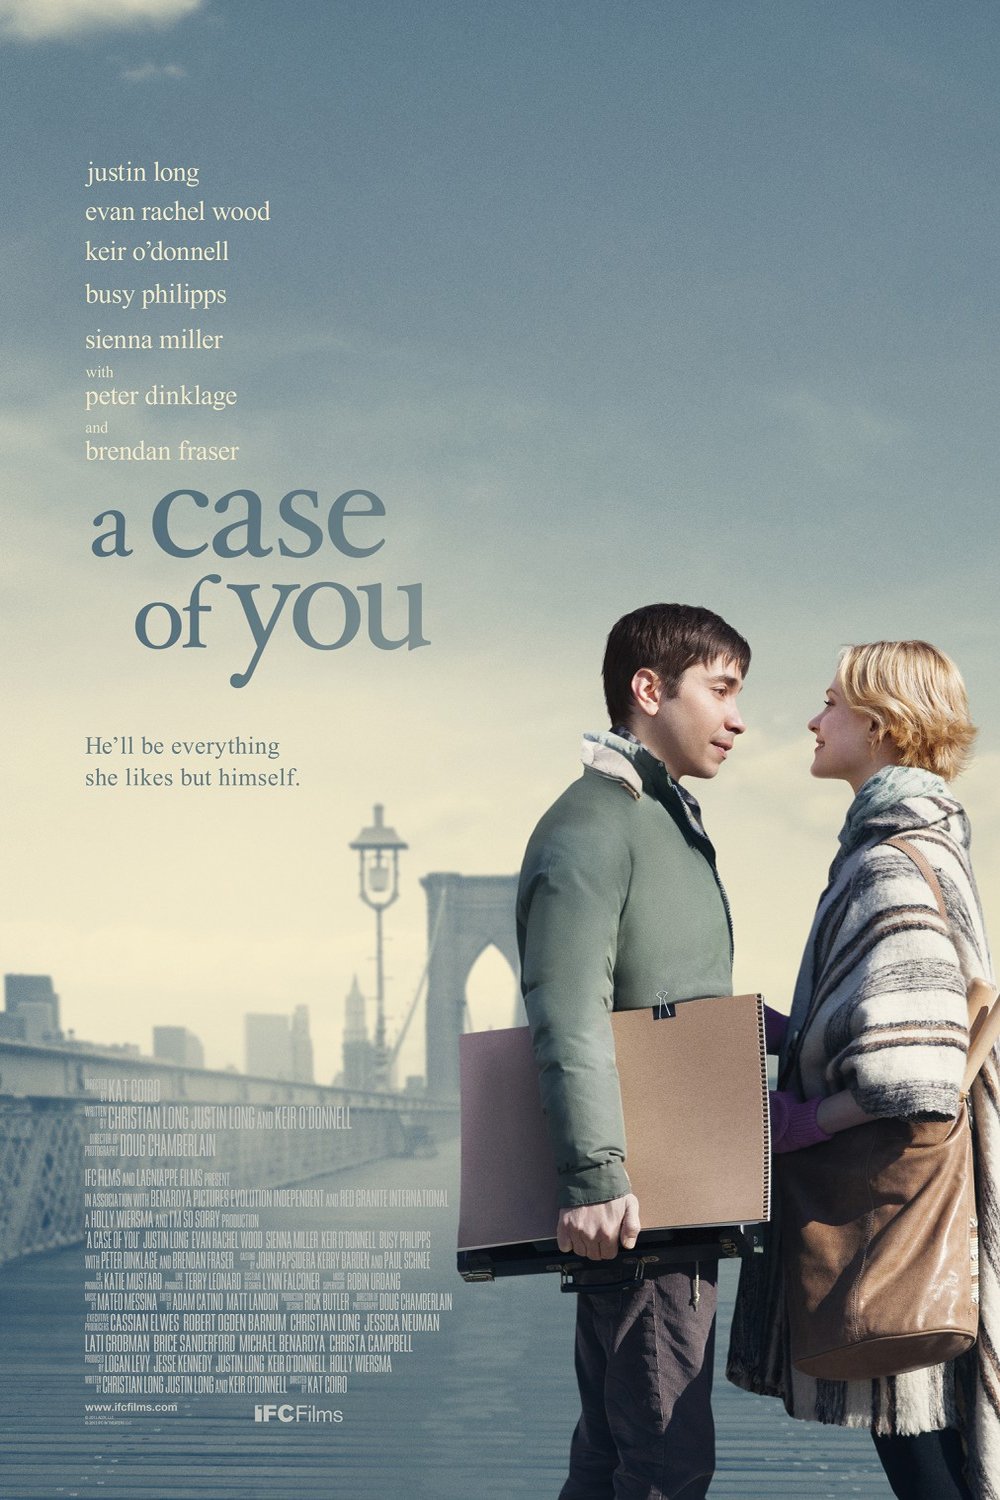 Poster of the movie A Case of You